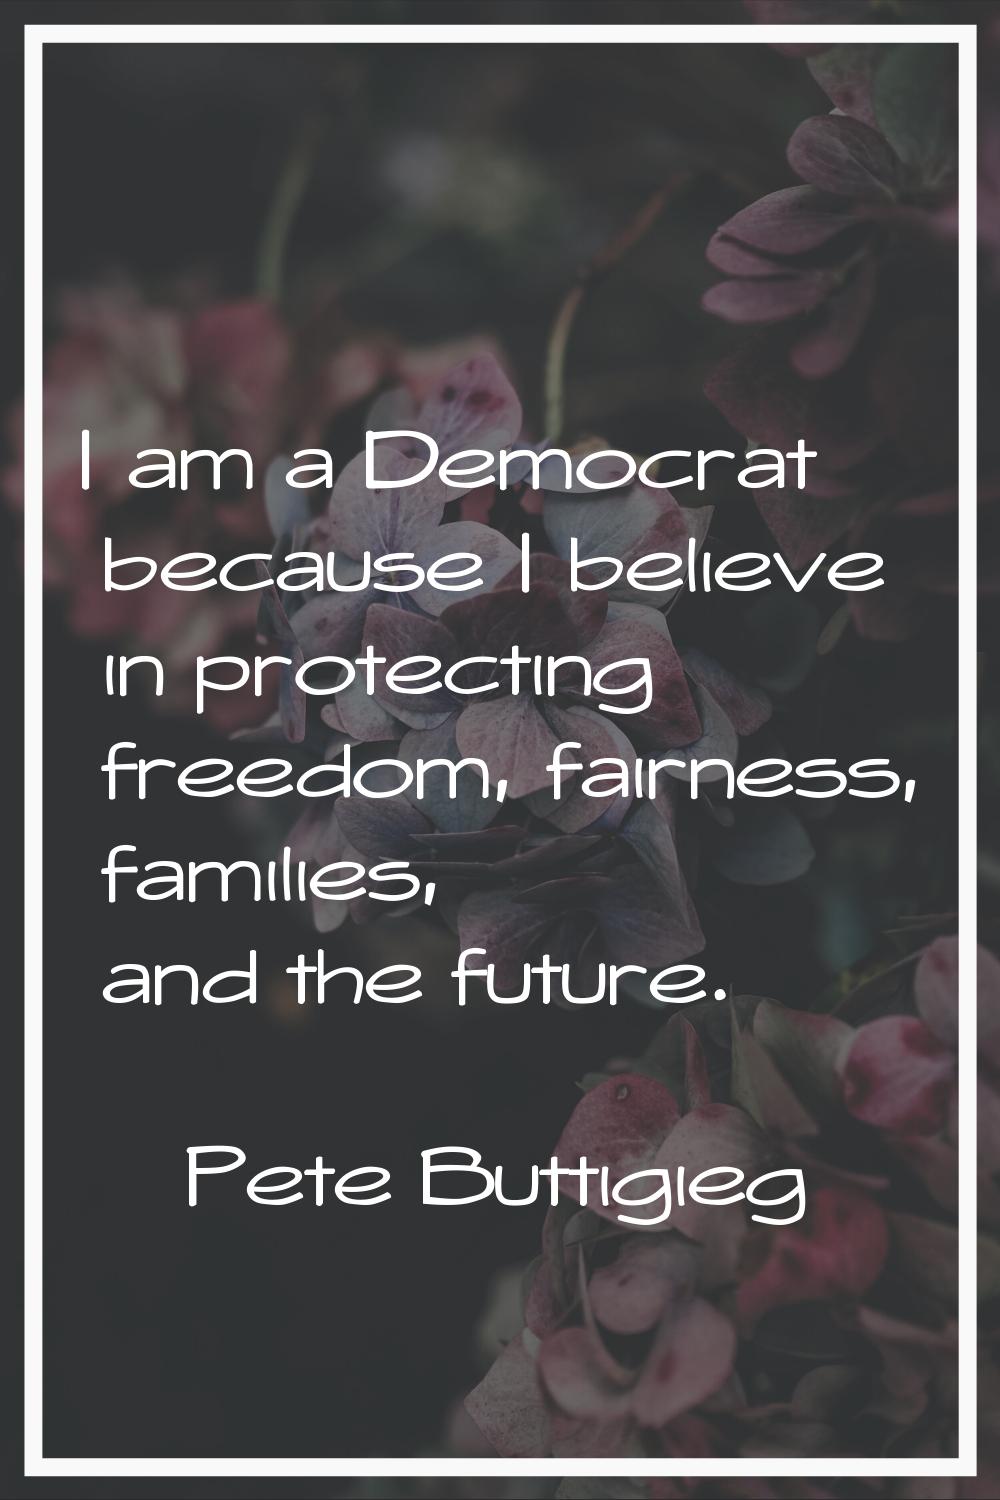 I am a Democrat because I believe in protecting freedom, fairness, families, and the future.